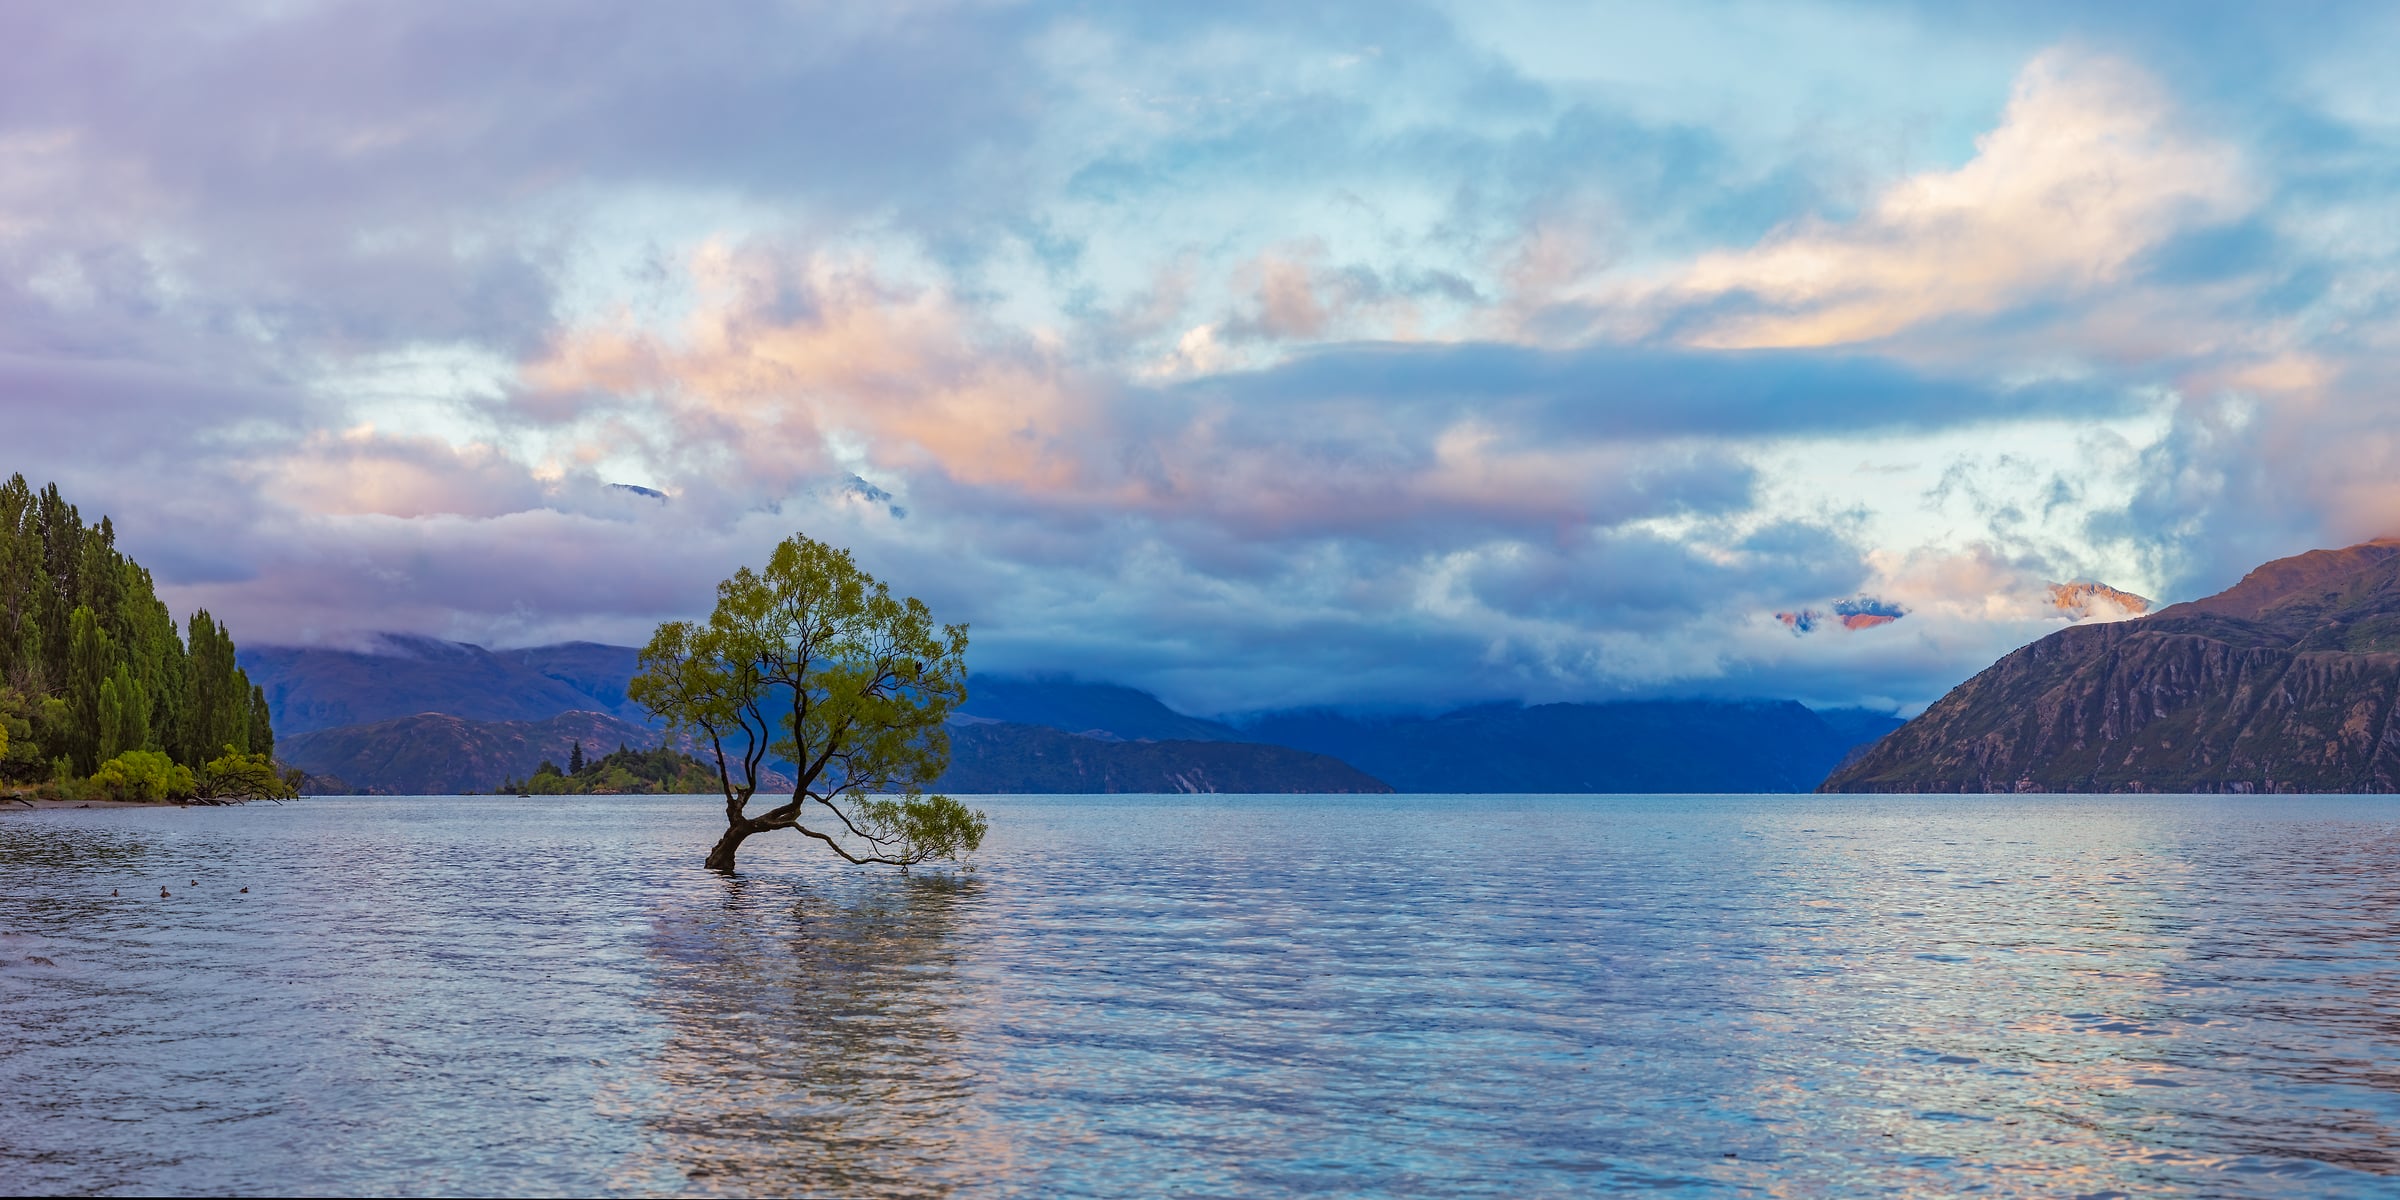 468 megapixels! A very high resolution, large-format VAST photo print of a tree in a lake at sunset; art photograph created by John Freeman in Wanaka Lake, Wanaka, New Zealand.